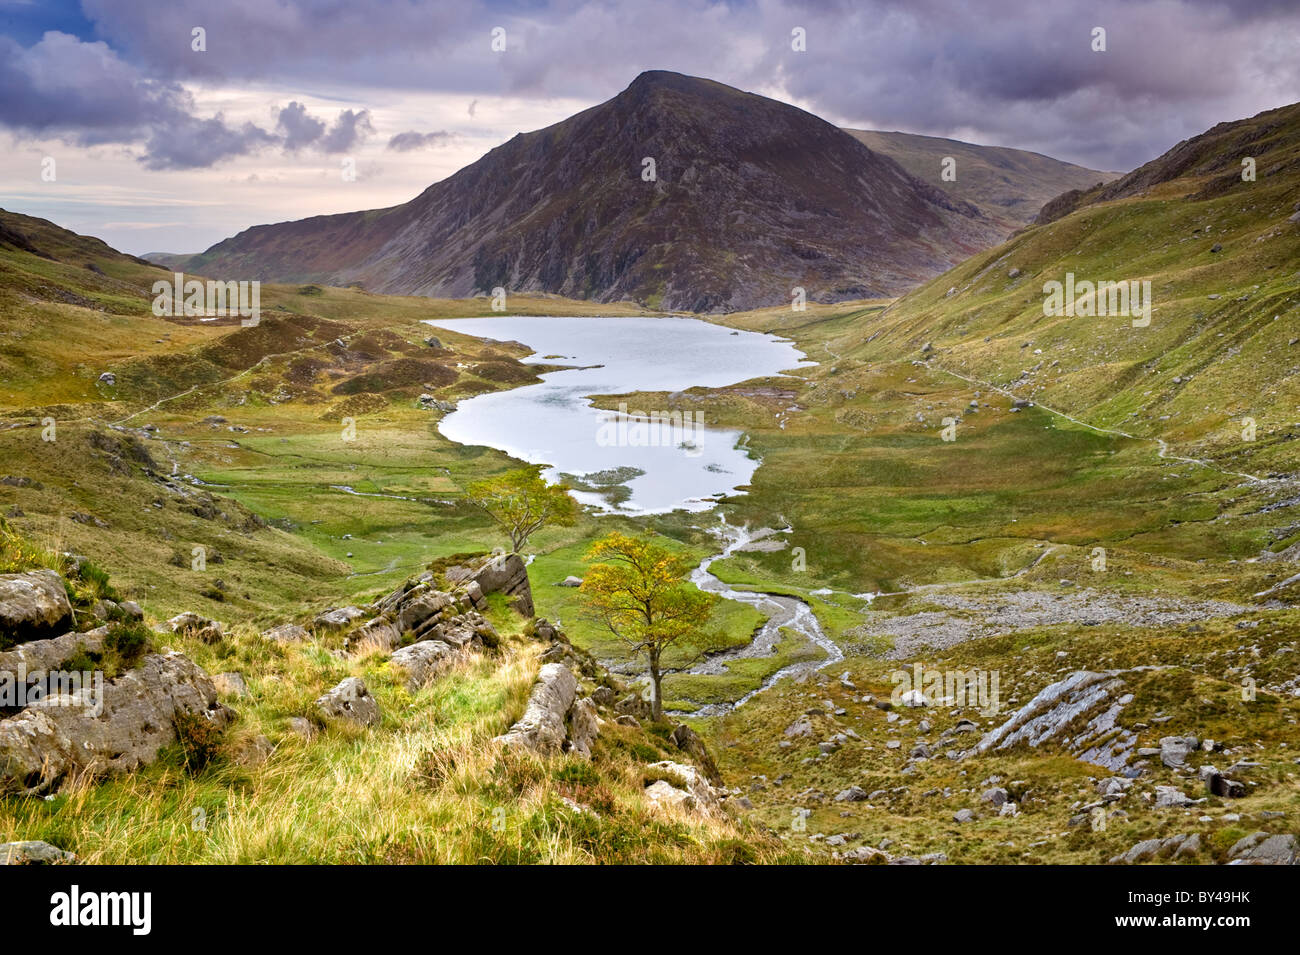 Llyn Idwal in Autumn backed by Pen yr Ole Wen & viewed from The Devils Kitchen, Snowdonia National Park, North Wales, UK Stock Photo